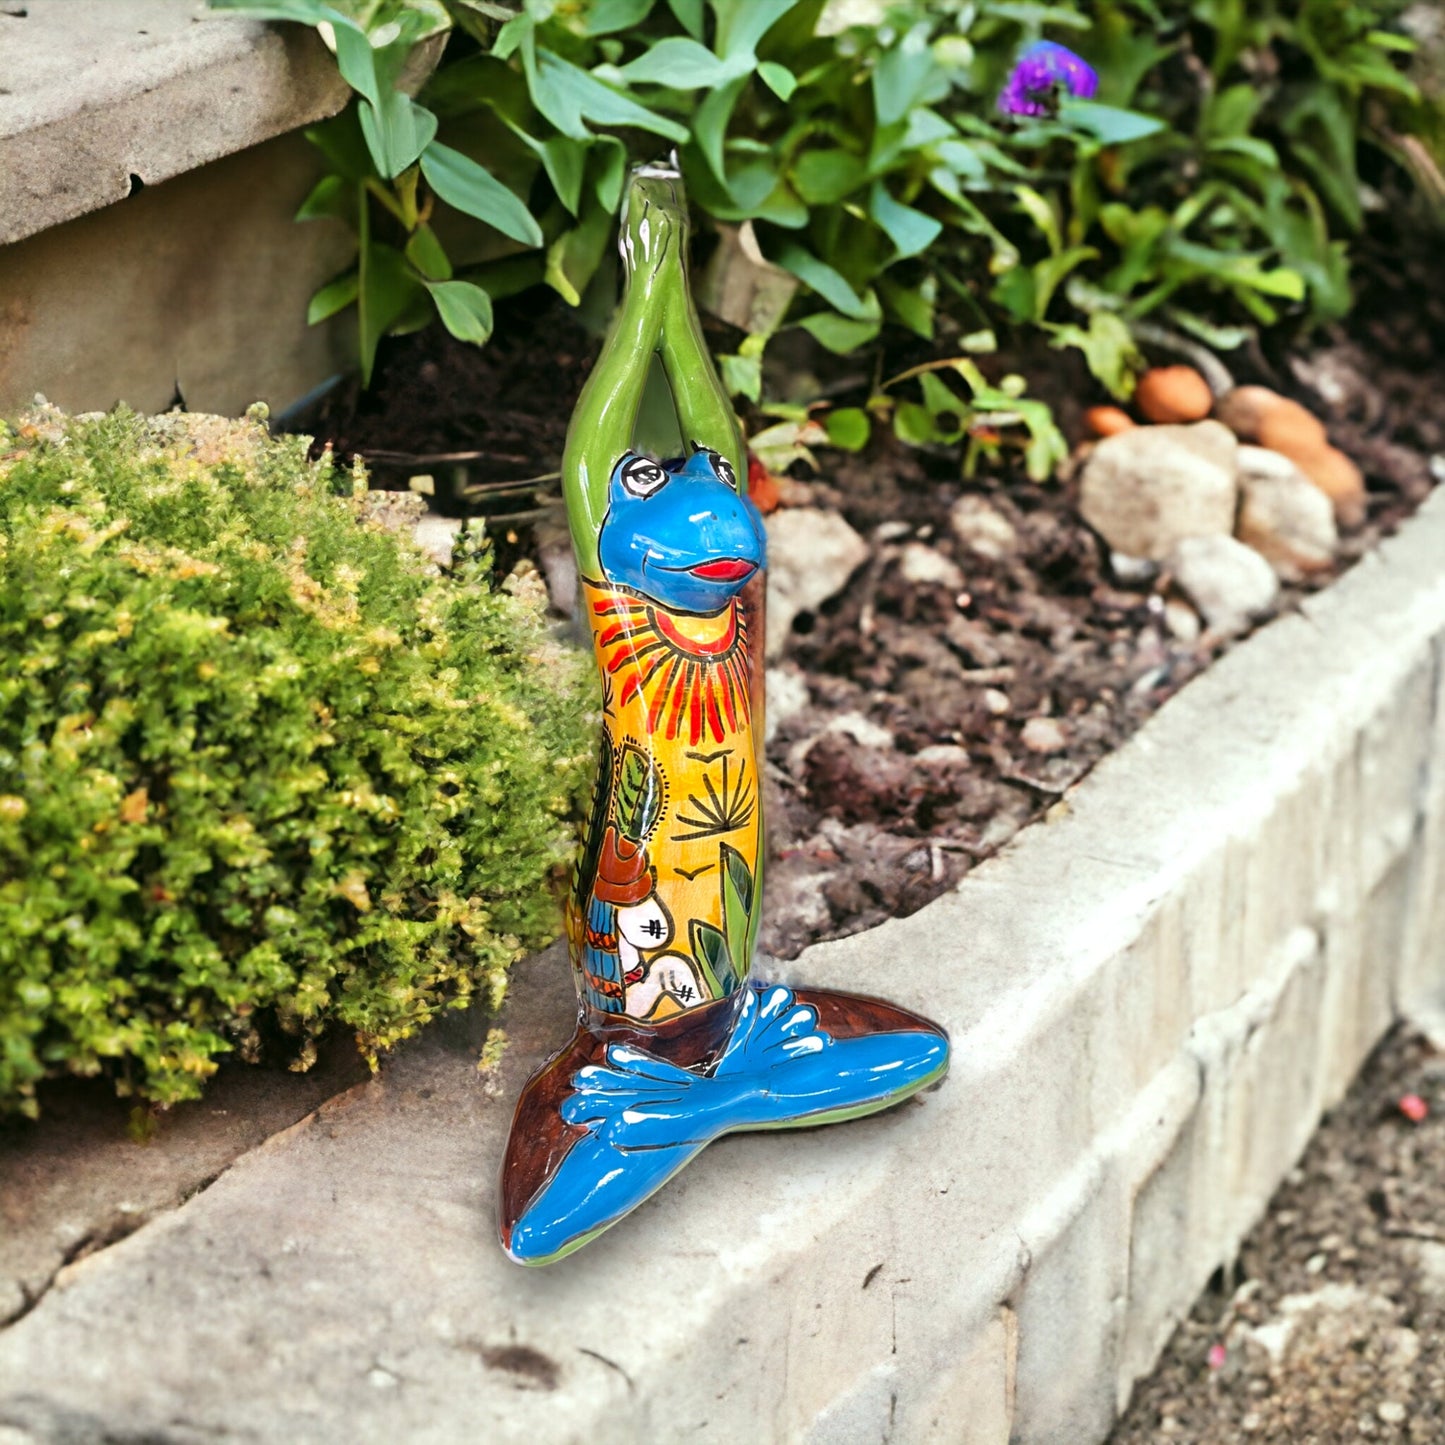 Vibrant Talavera Frog Statue | Colorful Hand-Painted Yoga Frog with Desert Design